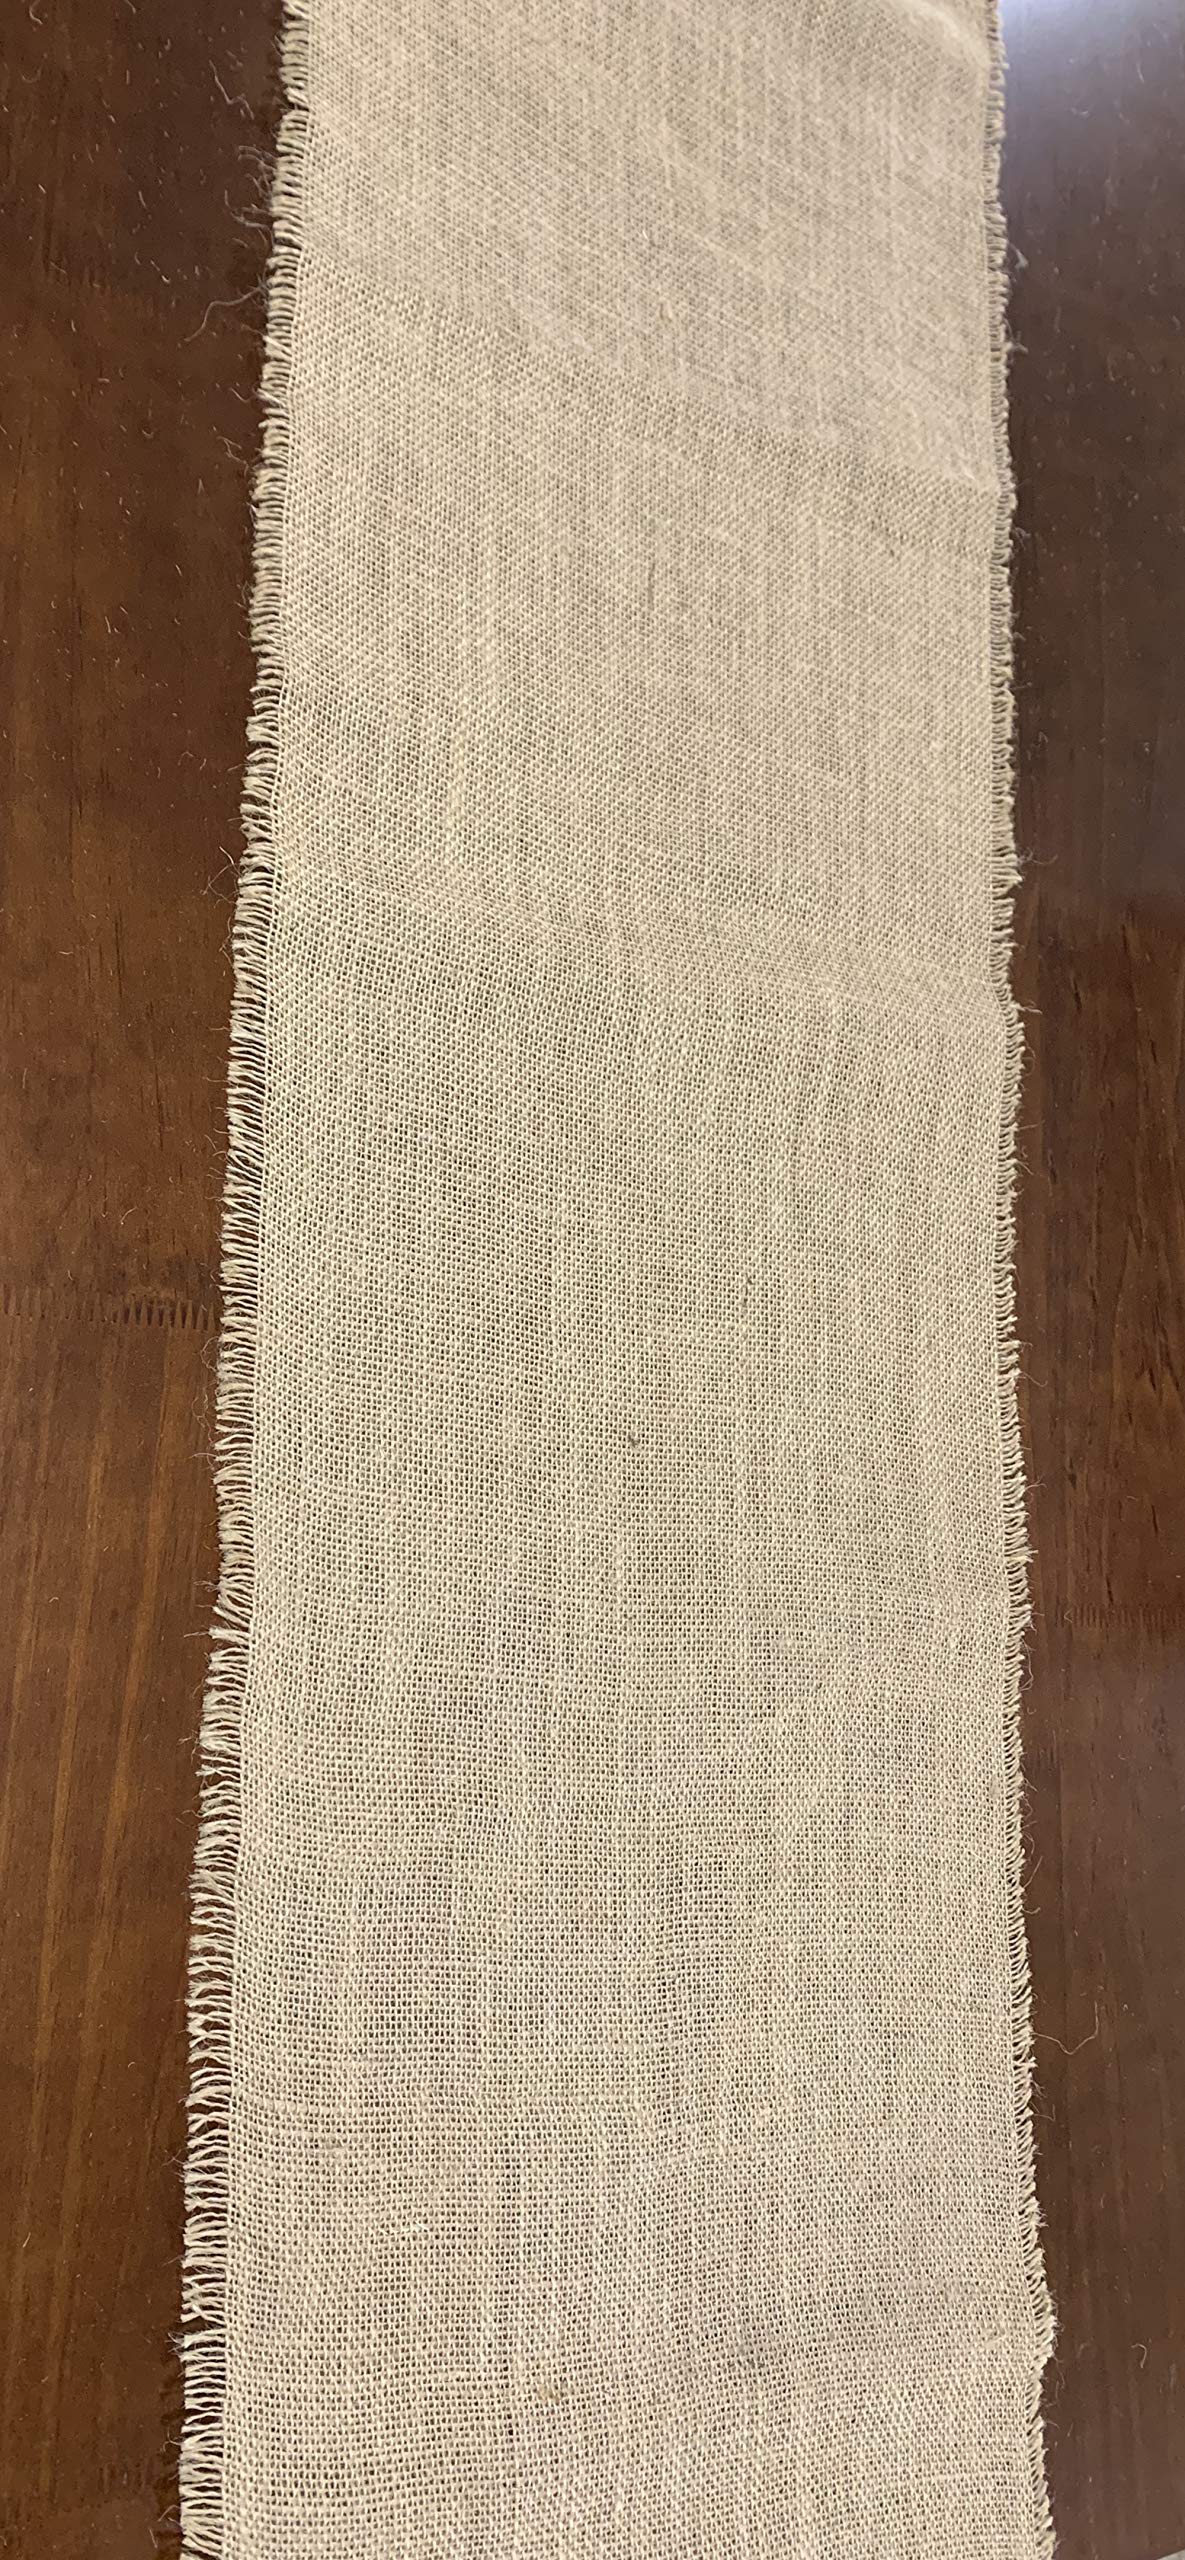 AAYU Burlap Table Runner with Natural Two Real Selvedge and Two Raw Edges 16 x 74 Inches Natural Jute Fabric Sheet for Home Party Event Wedding Decorations